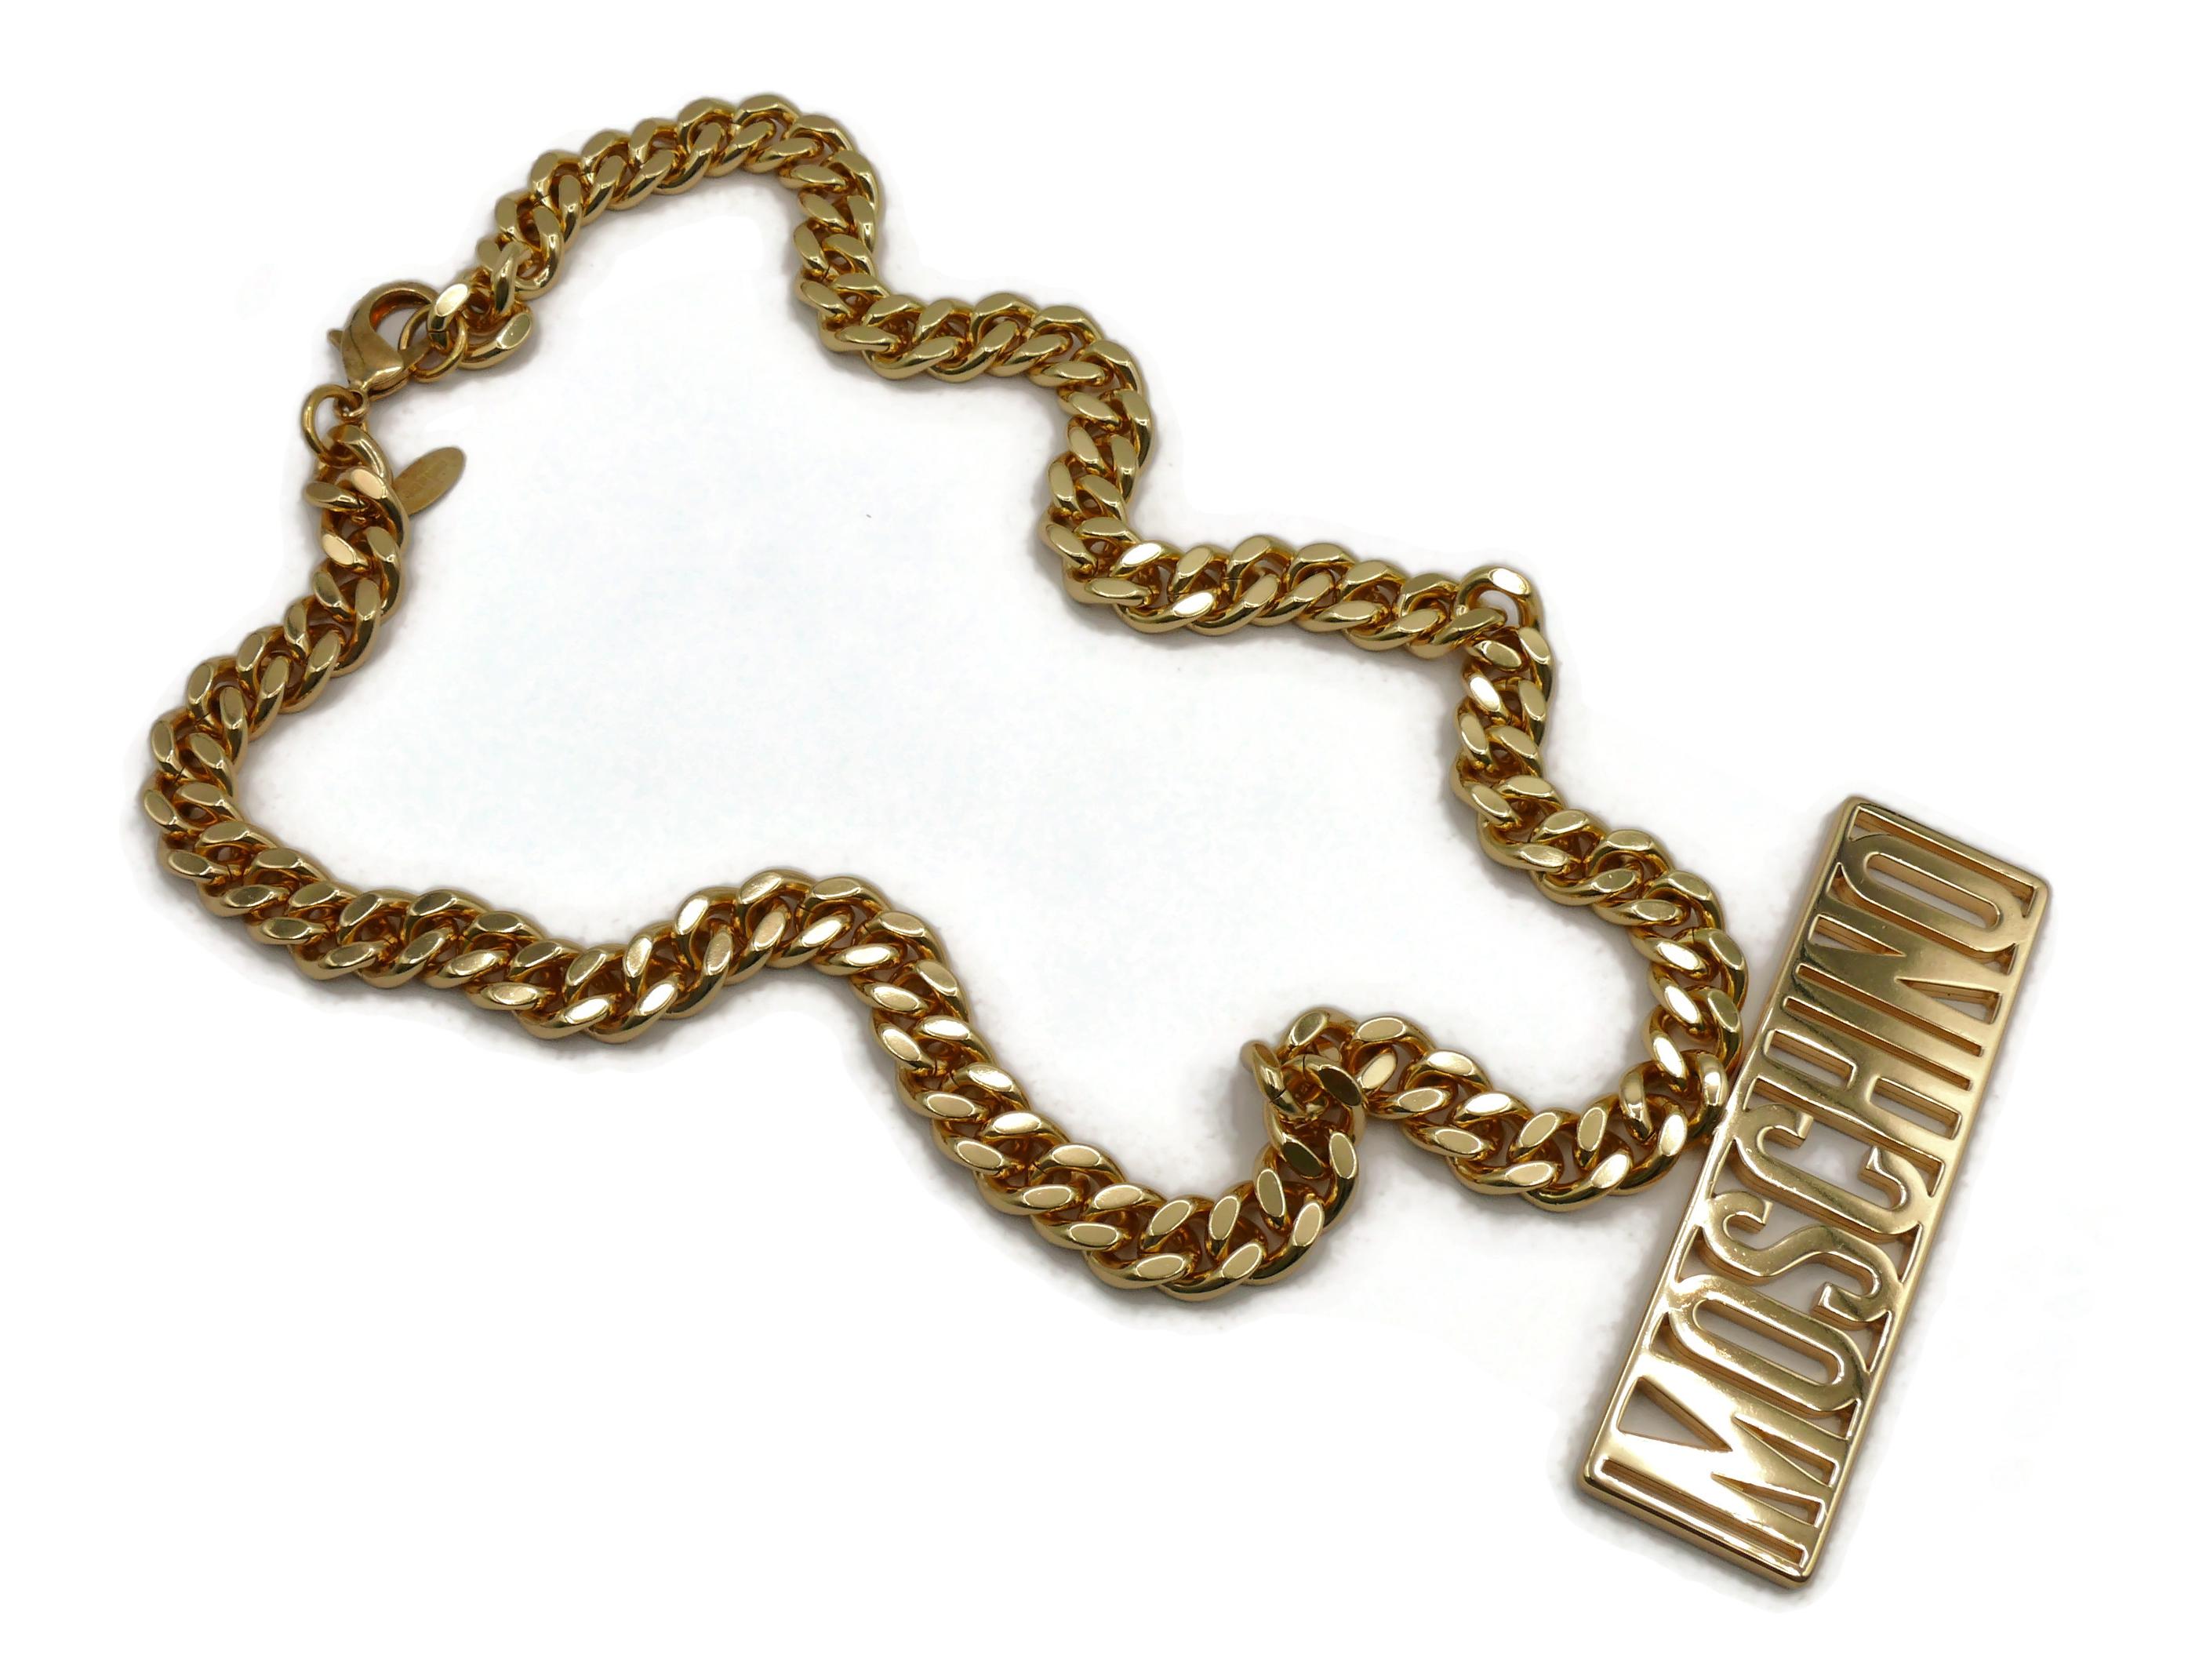 moschino chain necklace